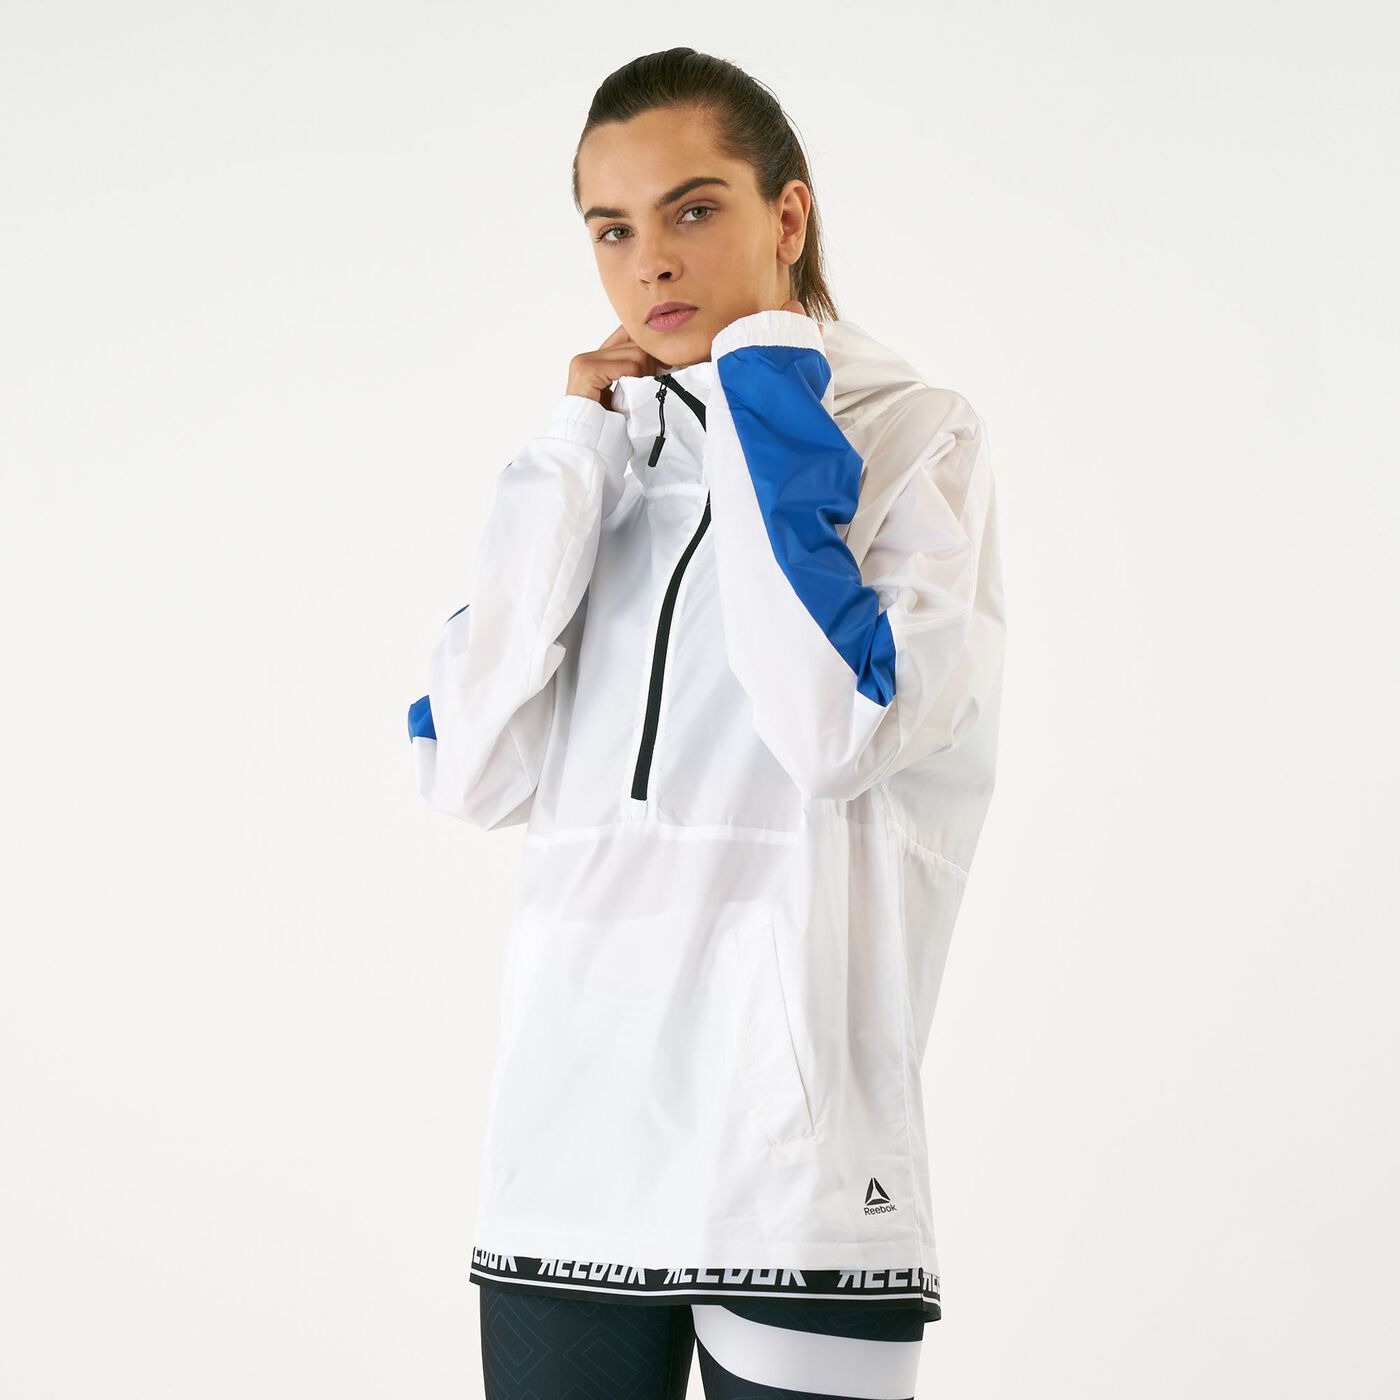 Women's Work Out Ready Meet You There Novelty Woven Jacket